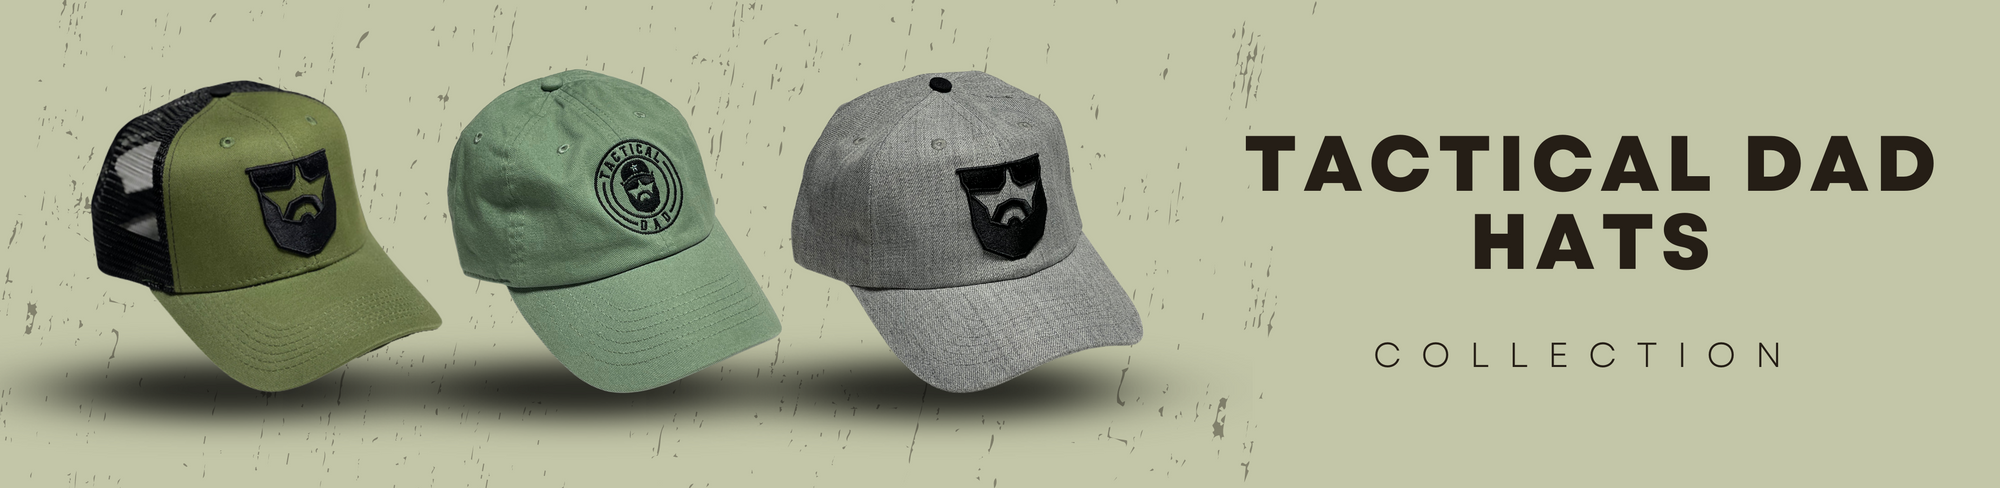 Tactical Dad Hats Collection